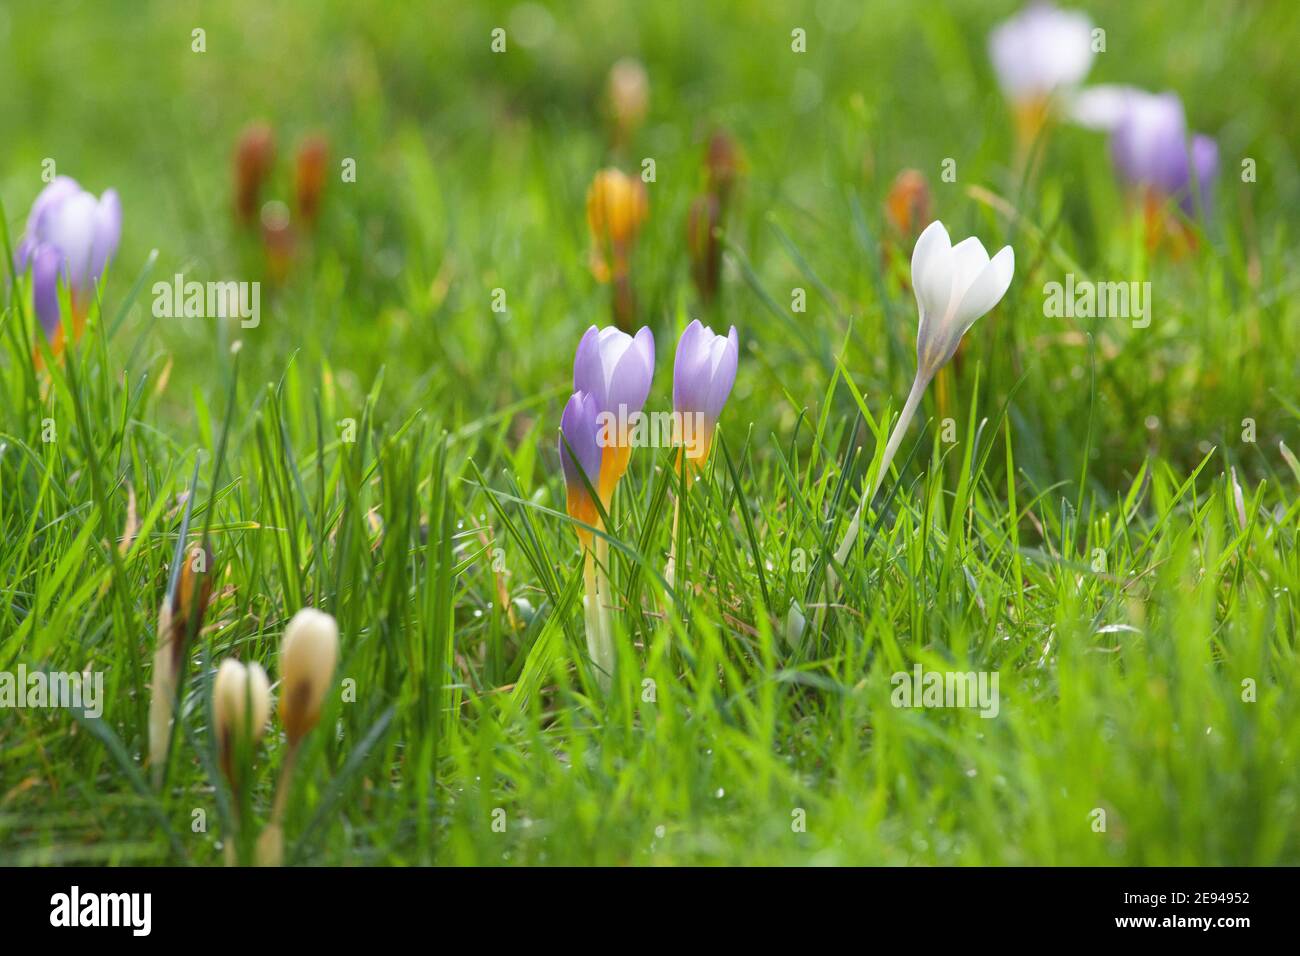 UK Weather, London, 2 February 2021: mild weather and sunshine in the south of England encourages crosuses into flower, even while snow is falling in the north of the UK. Anna Watson/Alamy Live News. Stock Photo